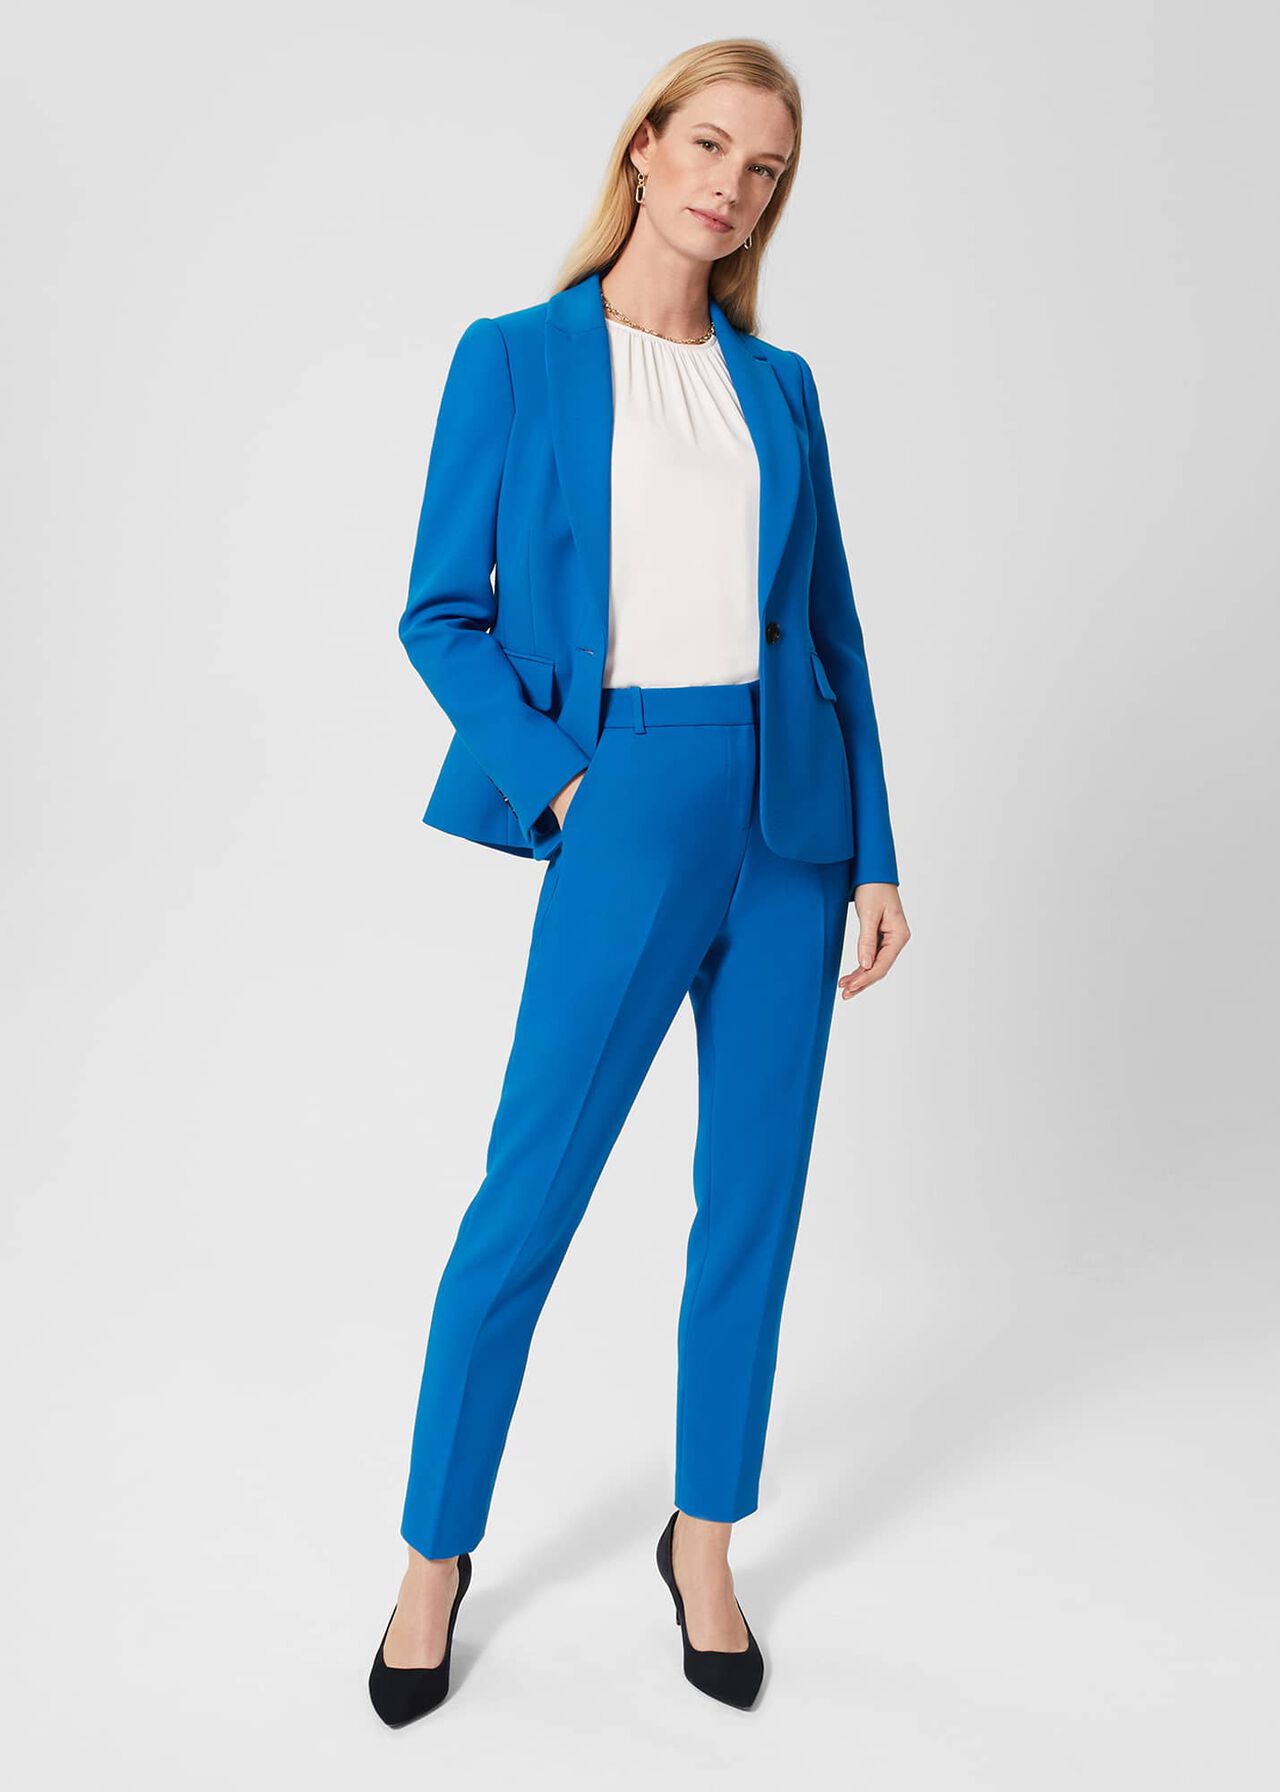 Blue suit with light blue blouse.  Work outfits women, Ladies trouser suits,  Suits for women